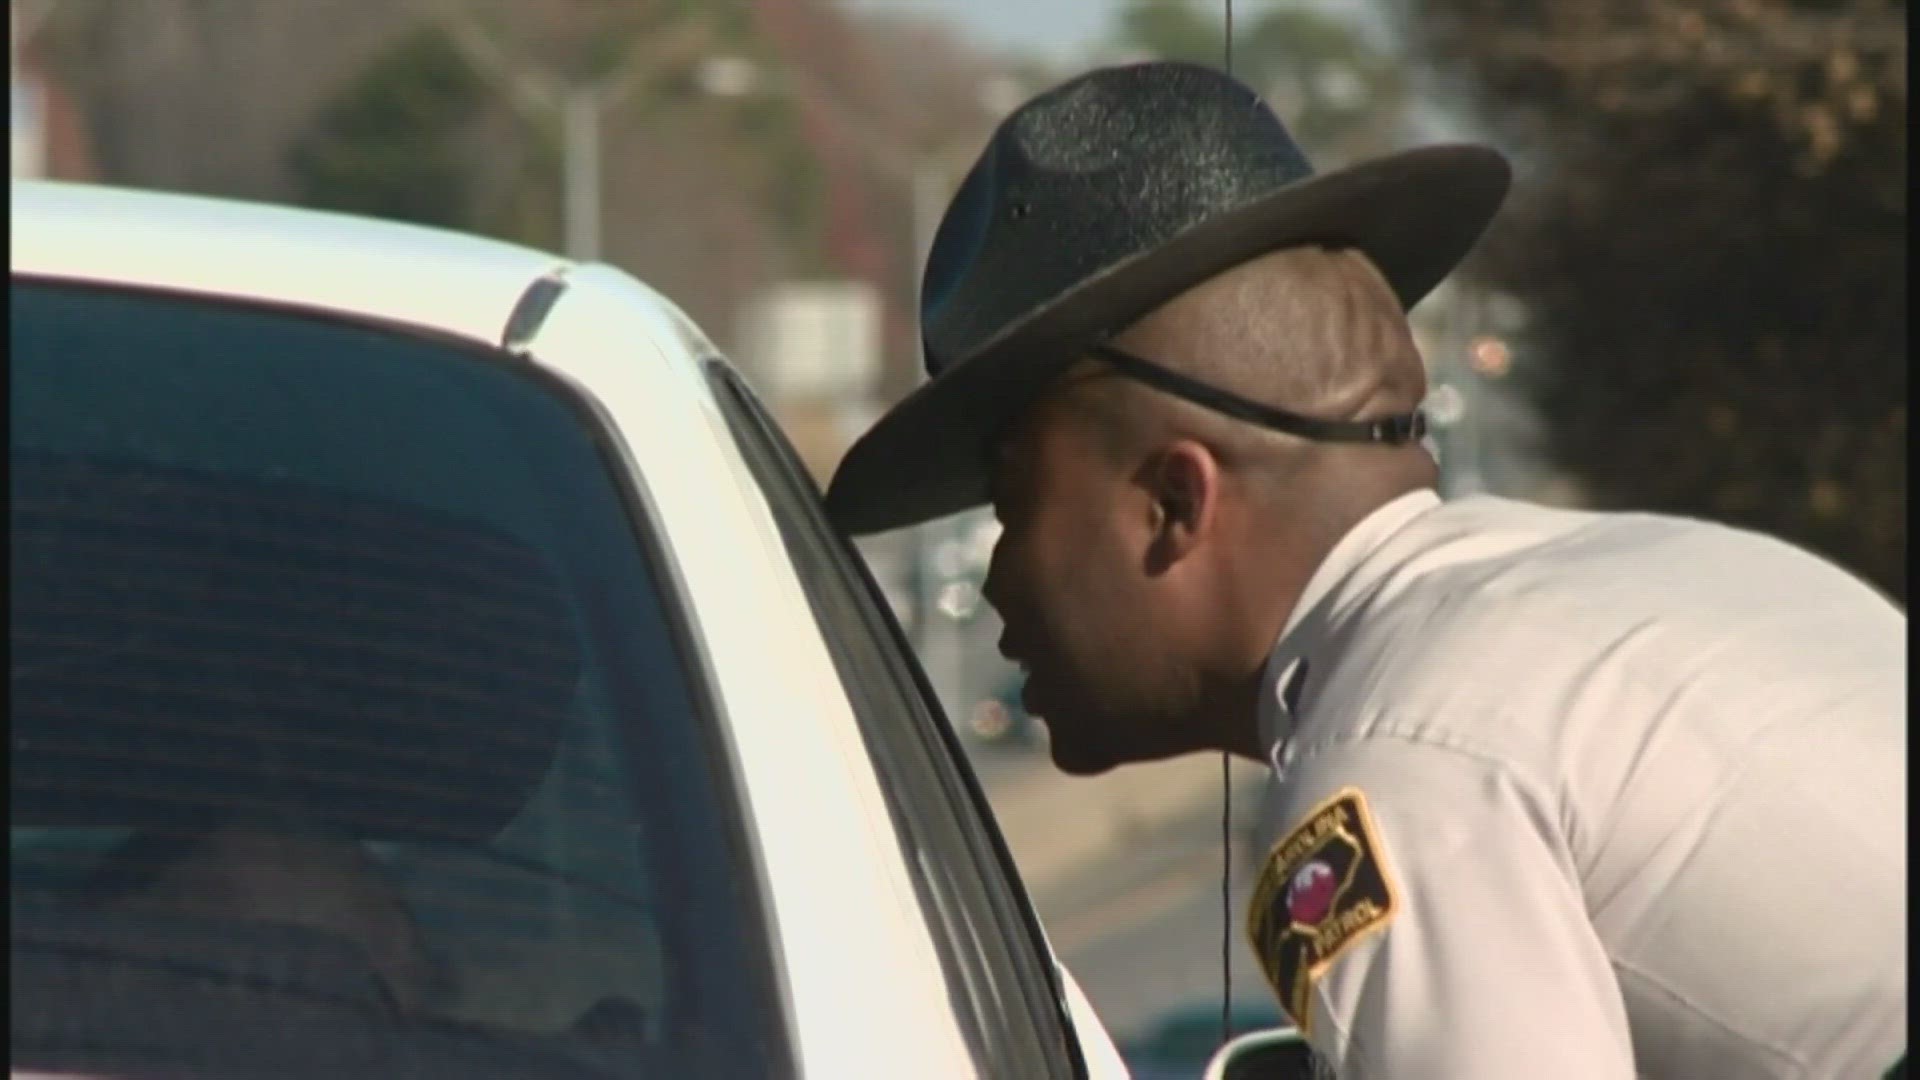 The North Carolina Highway Patrol has about 250 vacancies across the state.